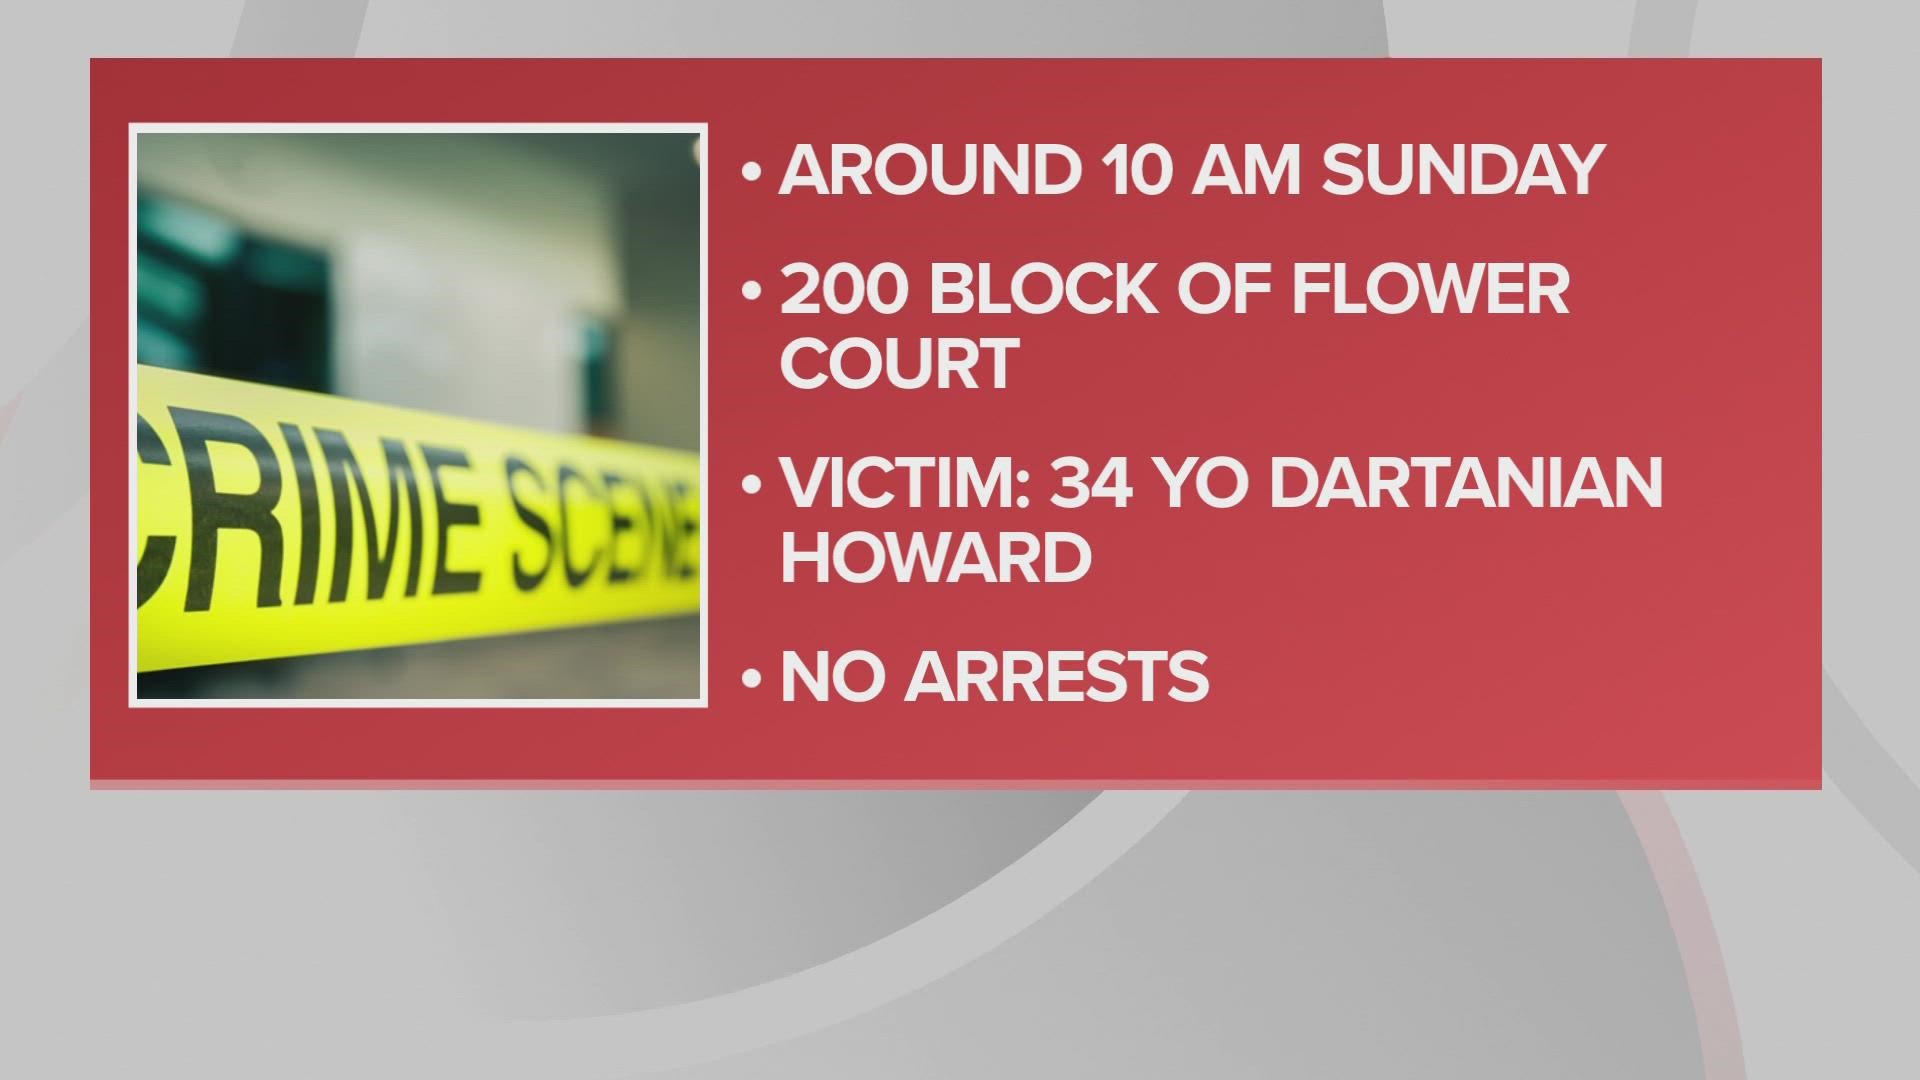 Akron police said the man was discovered Sunday morning on Flower Court.